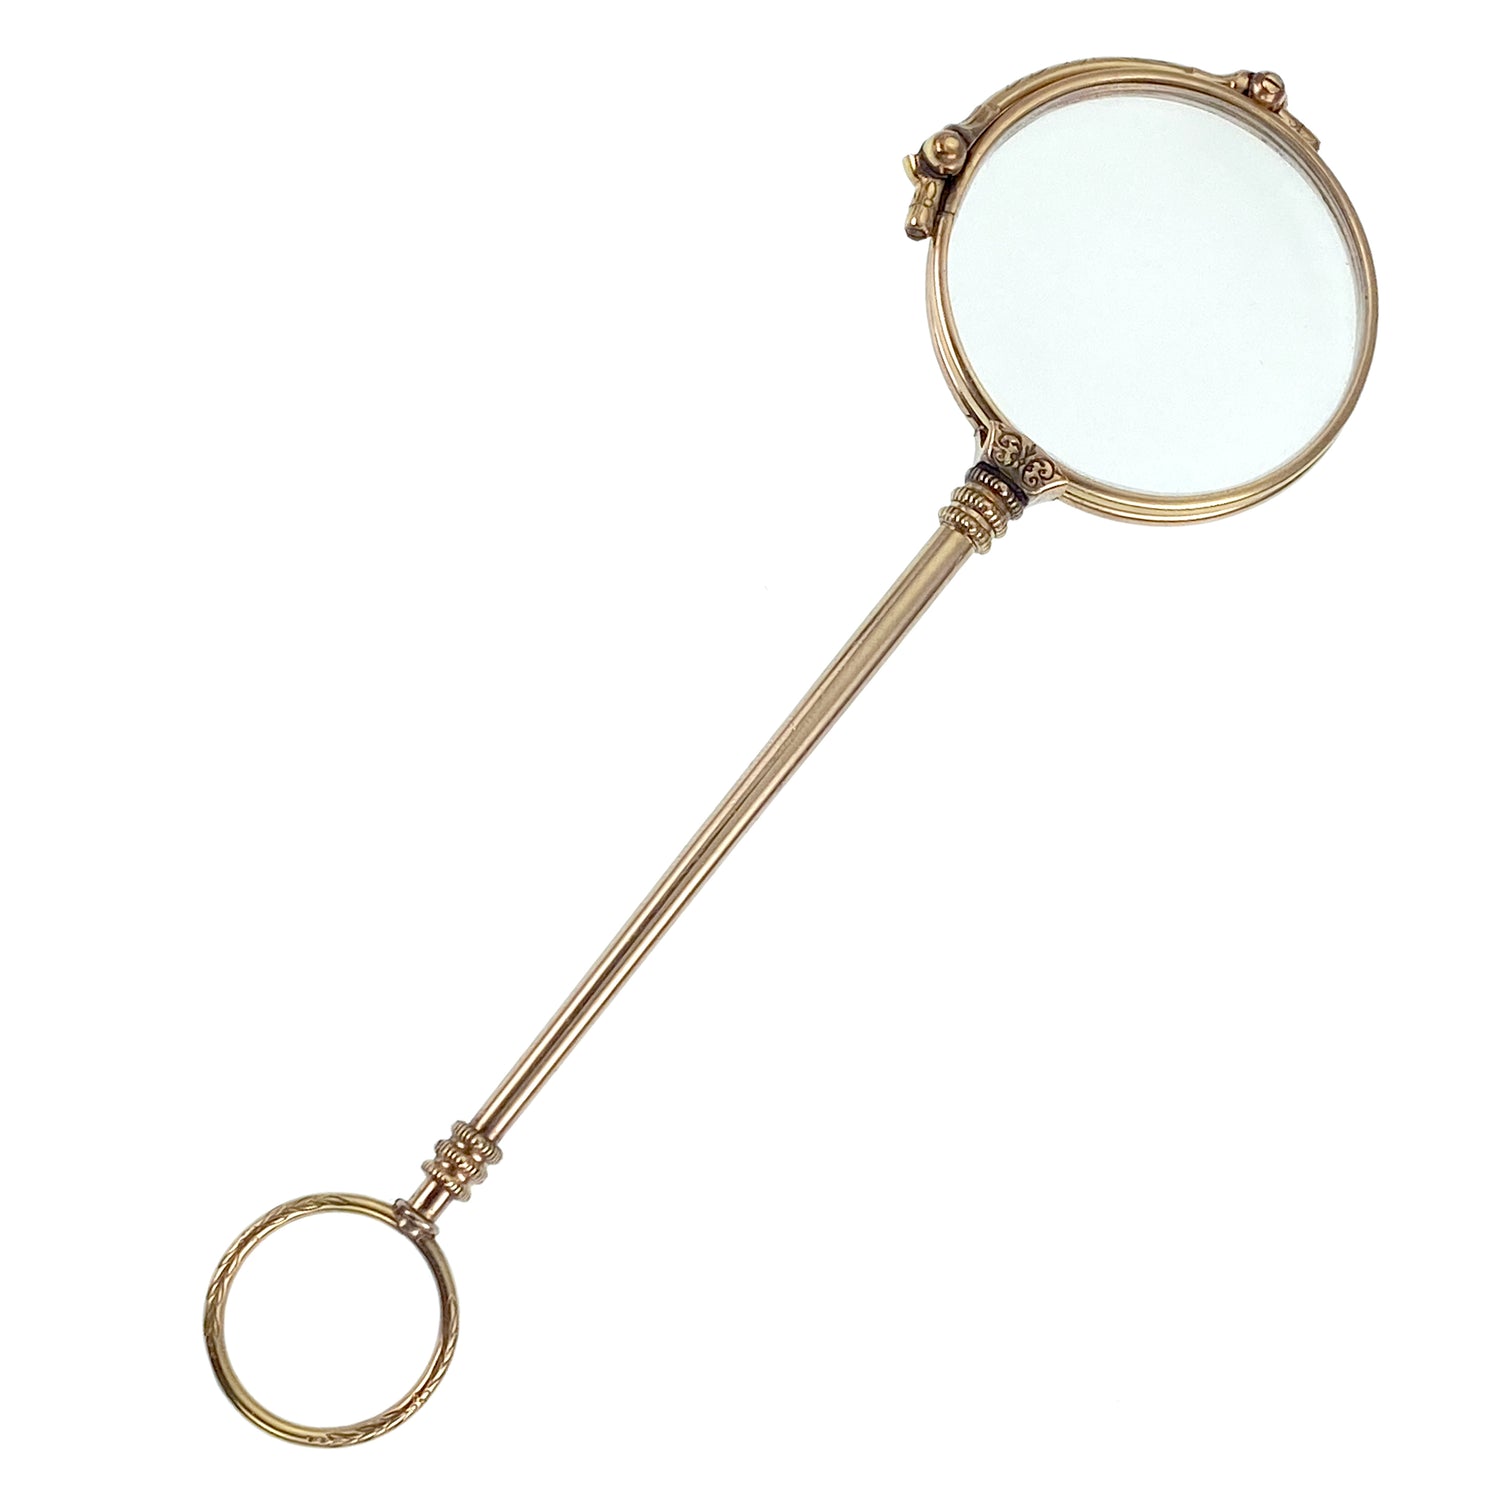 Antique Magnifying Glass, Magnifying Lens, Opera Glasses, Antique